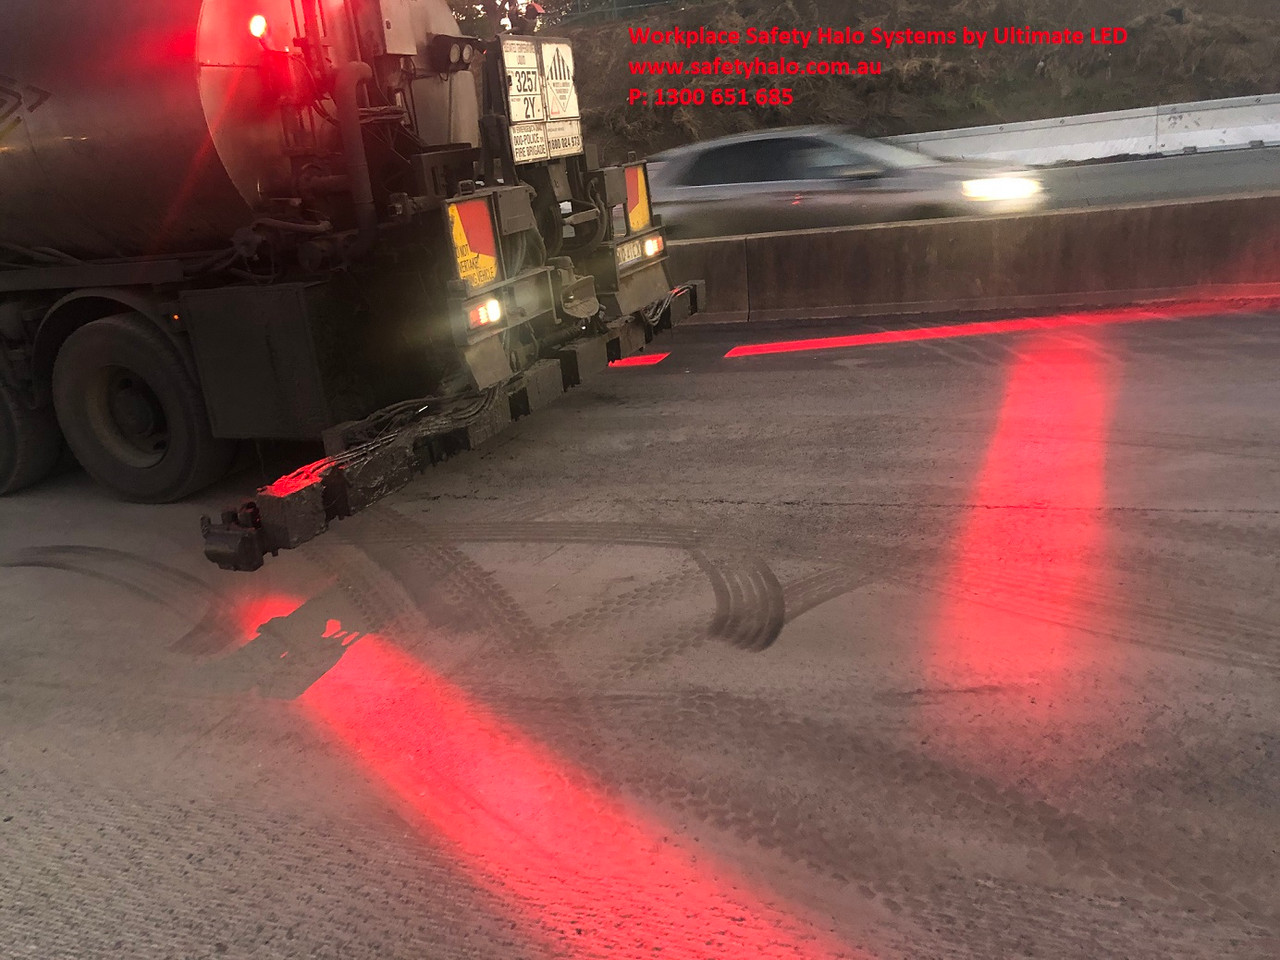 3A. Red Danger Zone Area Warning Light System. Pedestrian Workplace Mobile Machine Safety Halo System. Compact Light. New Technology 30 watts Red Line Beam. SHRL-30. Safety Halo Series